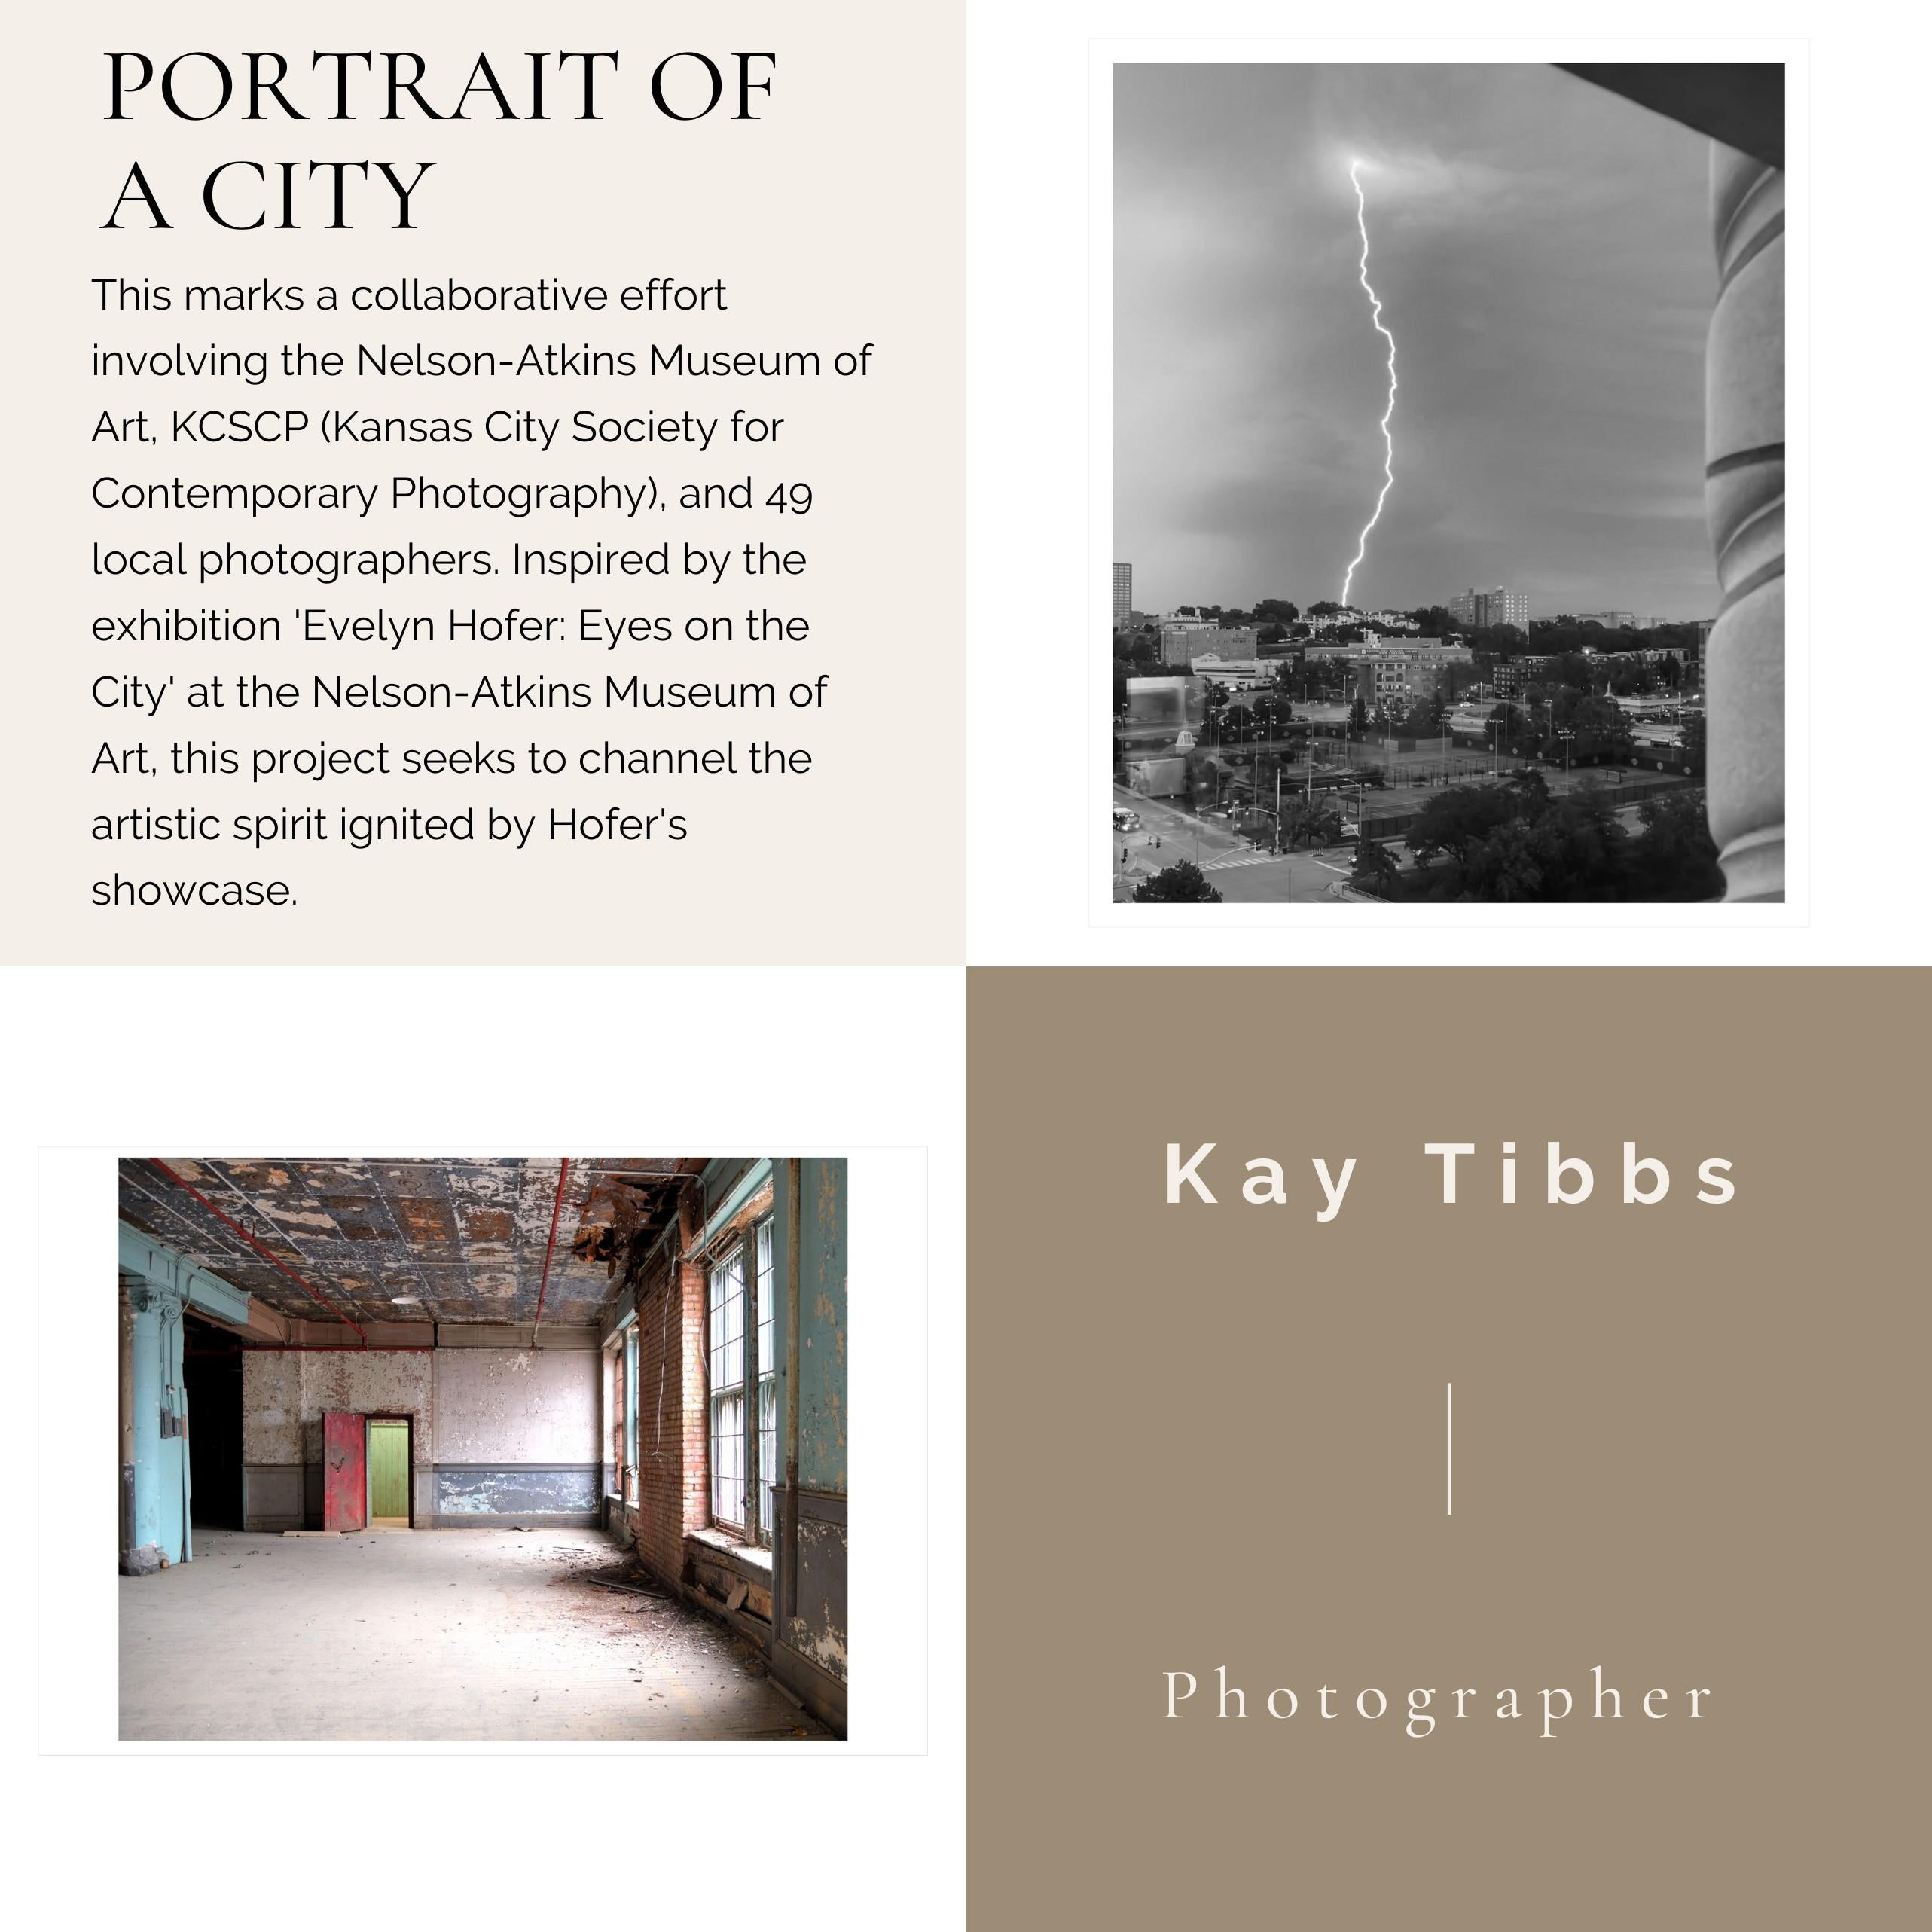 Kay Tibbs
Under the Skin
Year: 2024
Archival Pigment Print on
Hahnemuehle Baryta Rag
Framed Size: 13 x 13 x 0.25 inches
COA provided

*Ready to hang; matted and framed in a minimal black frame made from composite wood with standard plex

From